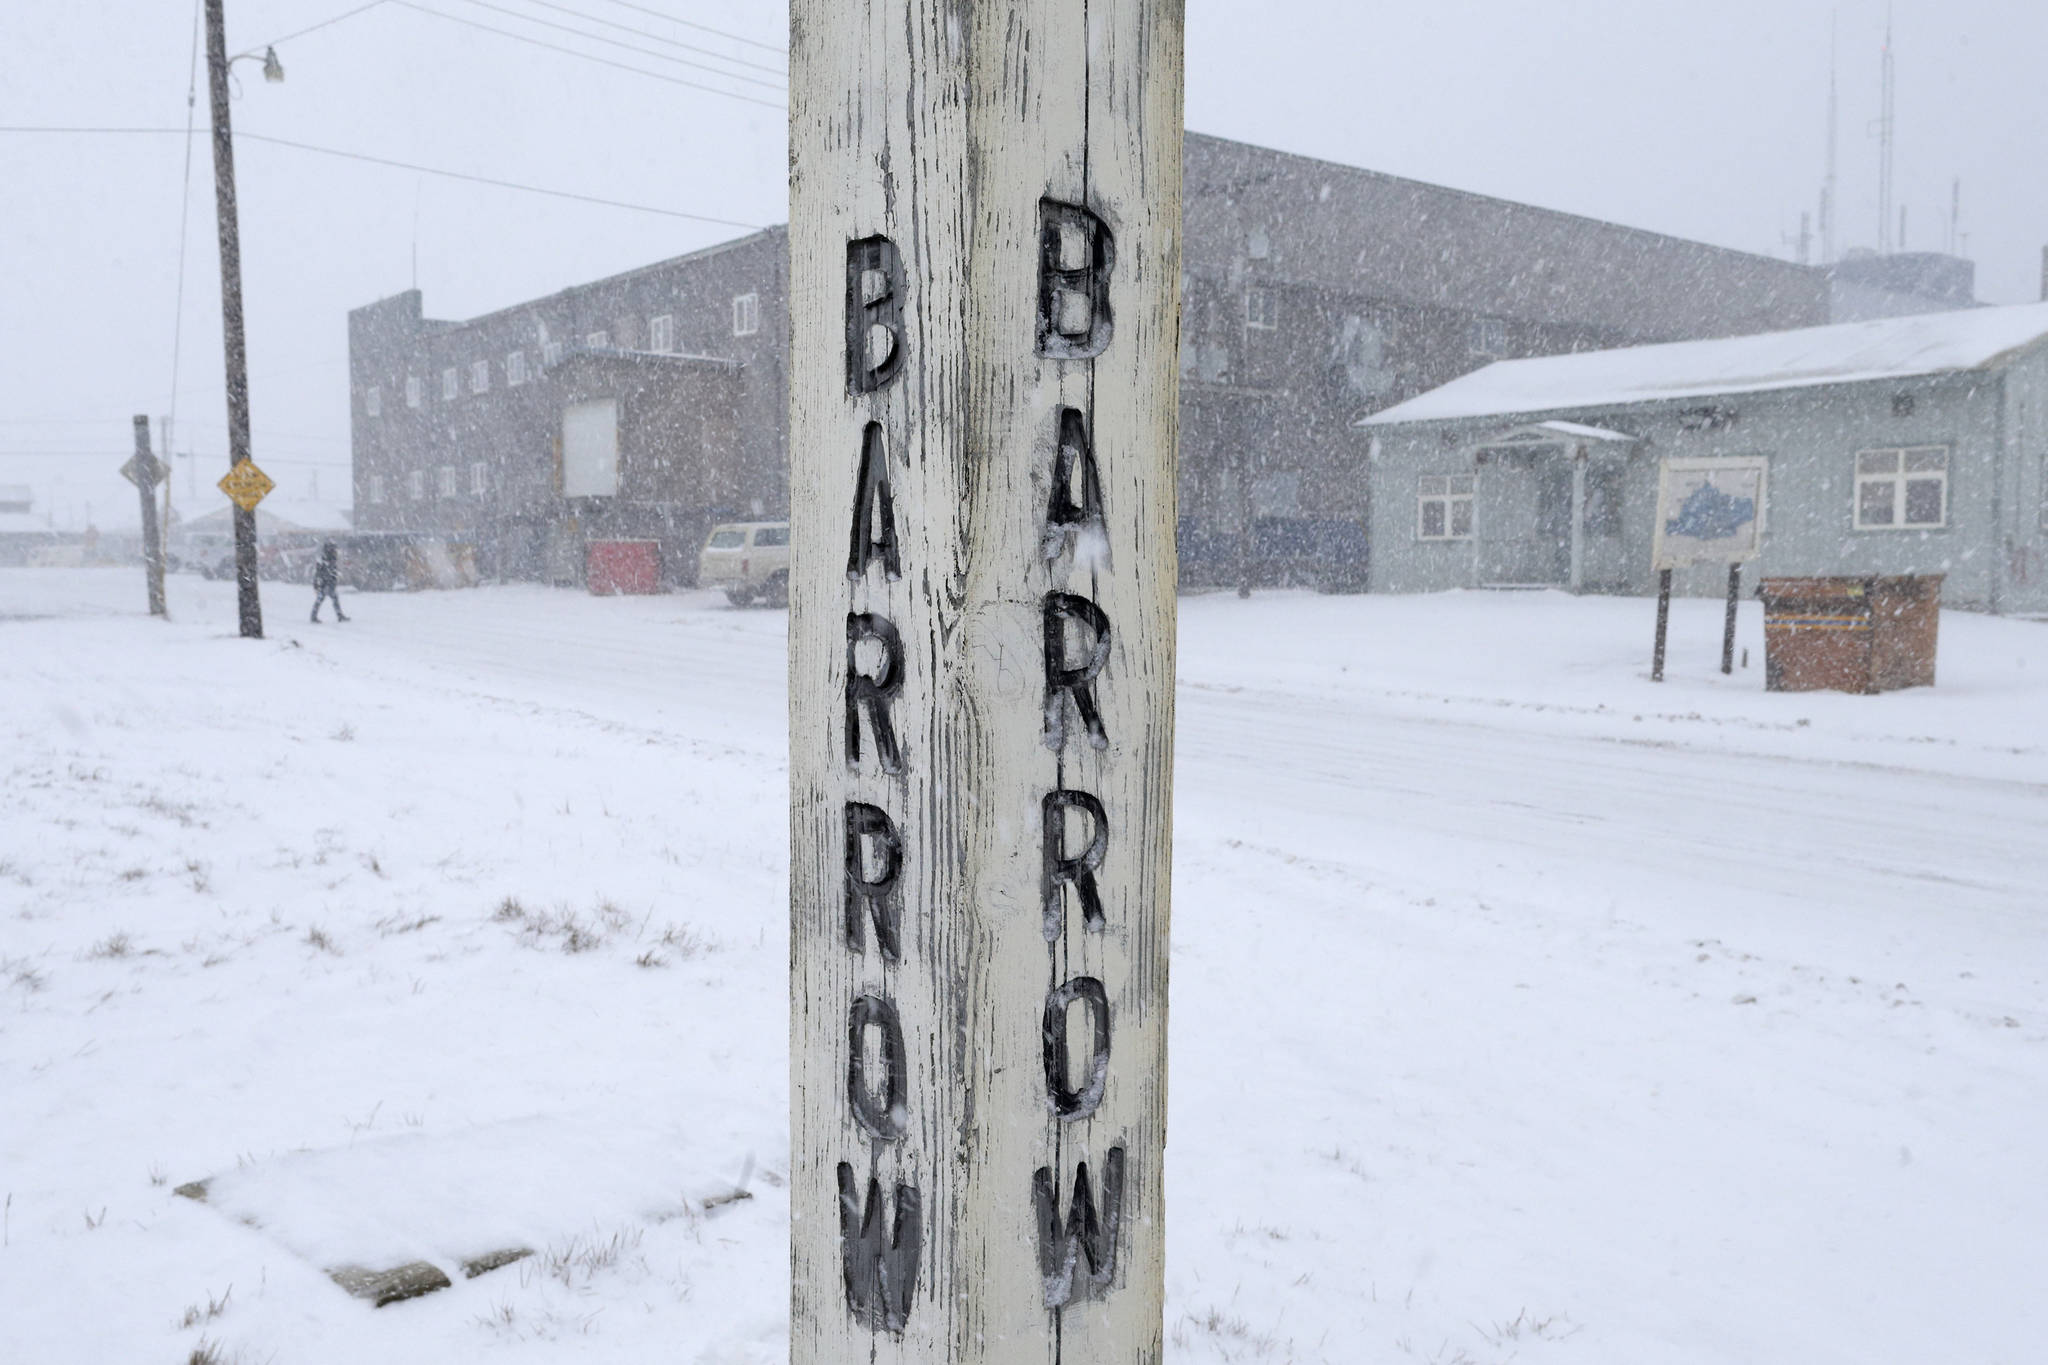 FILE - In this Oct. 10, 2014, file photo, snow falls around a sign in Barrow, Alaska. A court hearing is set for Thursday, March 9, 2017, in Alaska for the two sides in a lawsuit challenging the new Inupiat Eskimo name of the nation’s northernmost town. A judge in Alaska has dealt a legal blow to opponents of the new Inupiat Eskimo name approved by voters in the nation’s northernmost town. Superior Court Judge Paul Roetman on Friday, March 10, 2017, denied a request to halt implementation of the transition from the old name of Barrow to Utqiagvik until a lawsuit filed by a local Alaska Native corporation is resolved. (AP Photo/Gregory Bull, File)